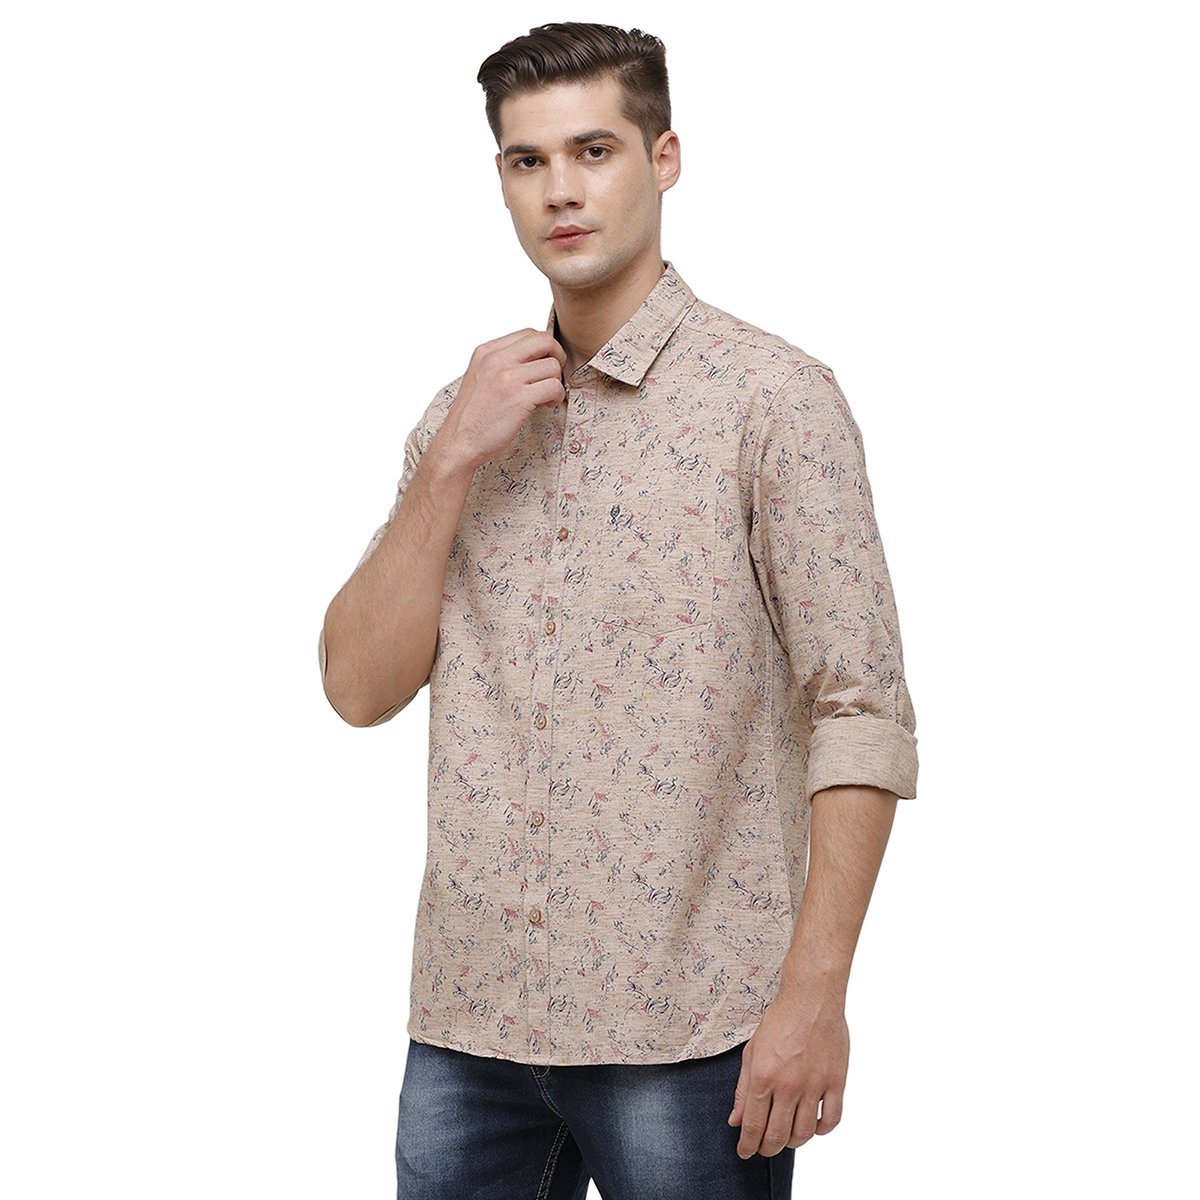 Classic Polo Mens Collar Neck Full Sleeve Beige Smart Fit 100% Cotton Woven Shirt SM1-78 A-FS-PRT-SF Shirts Classic Polo 